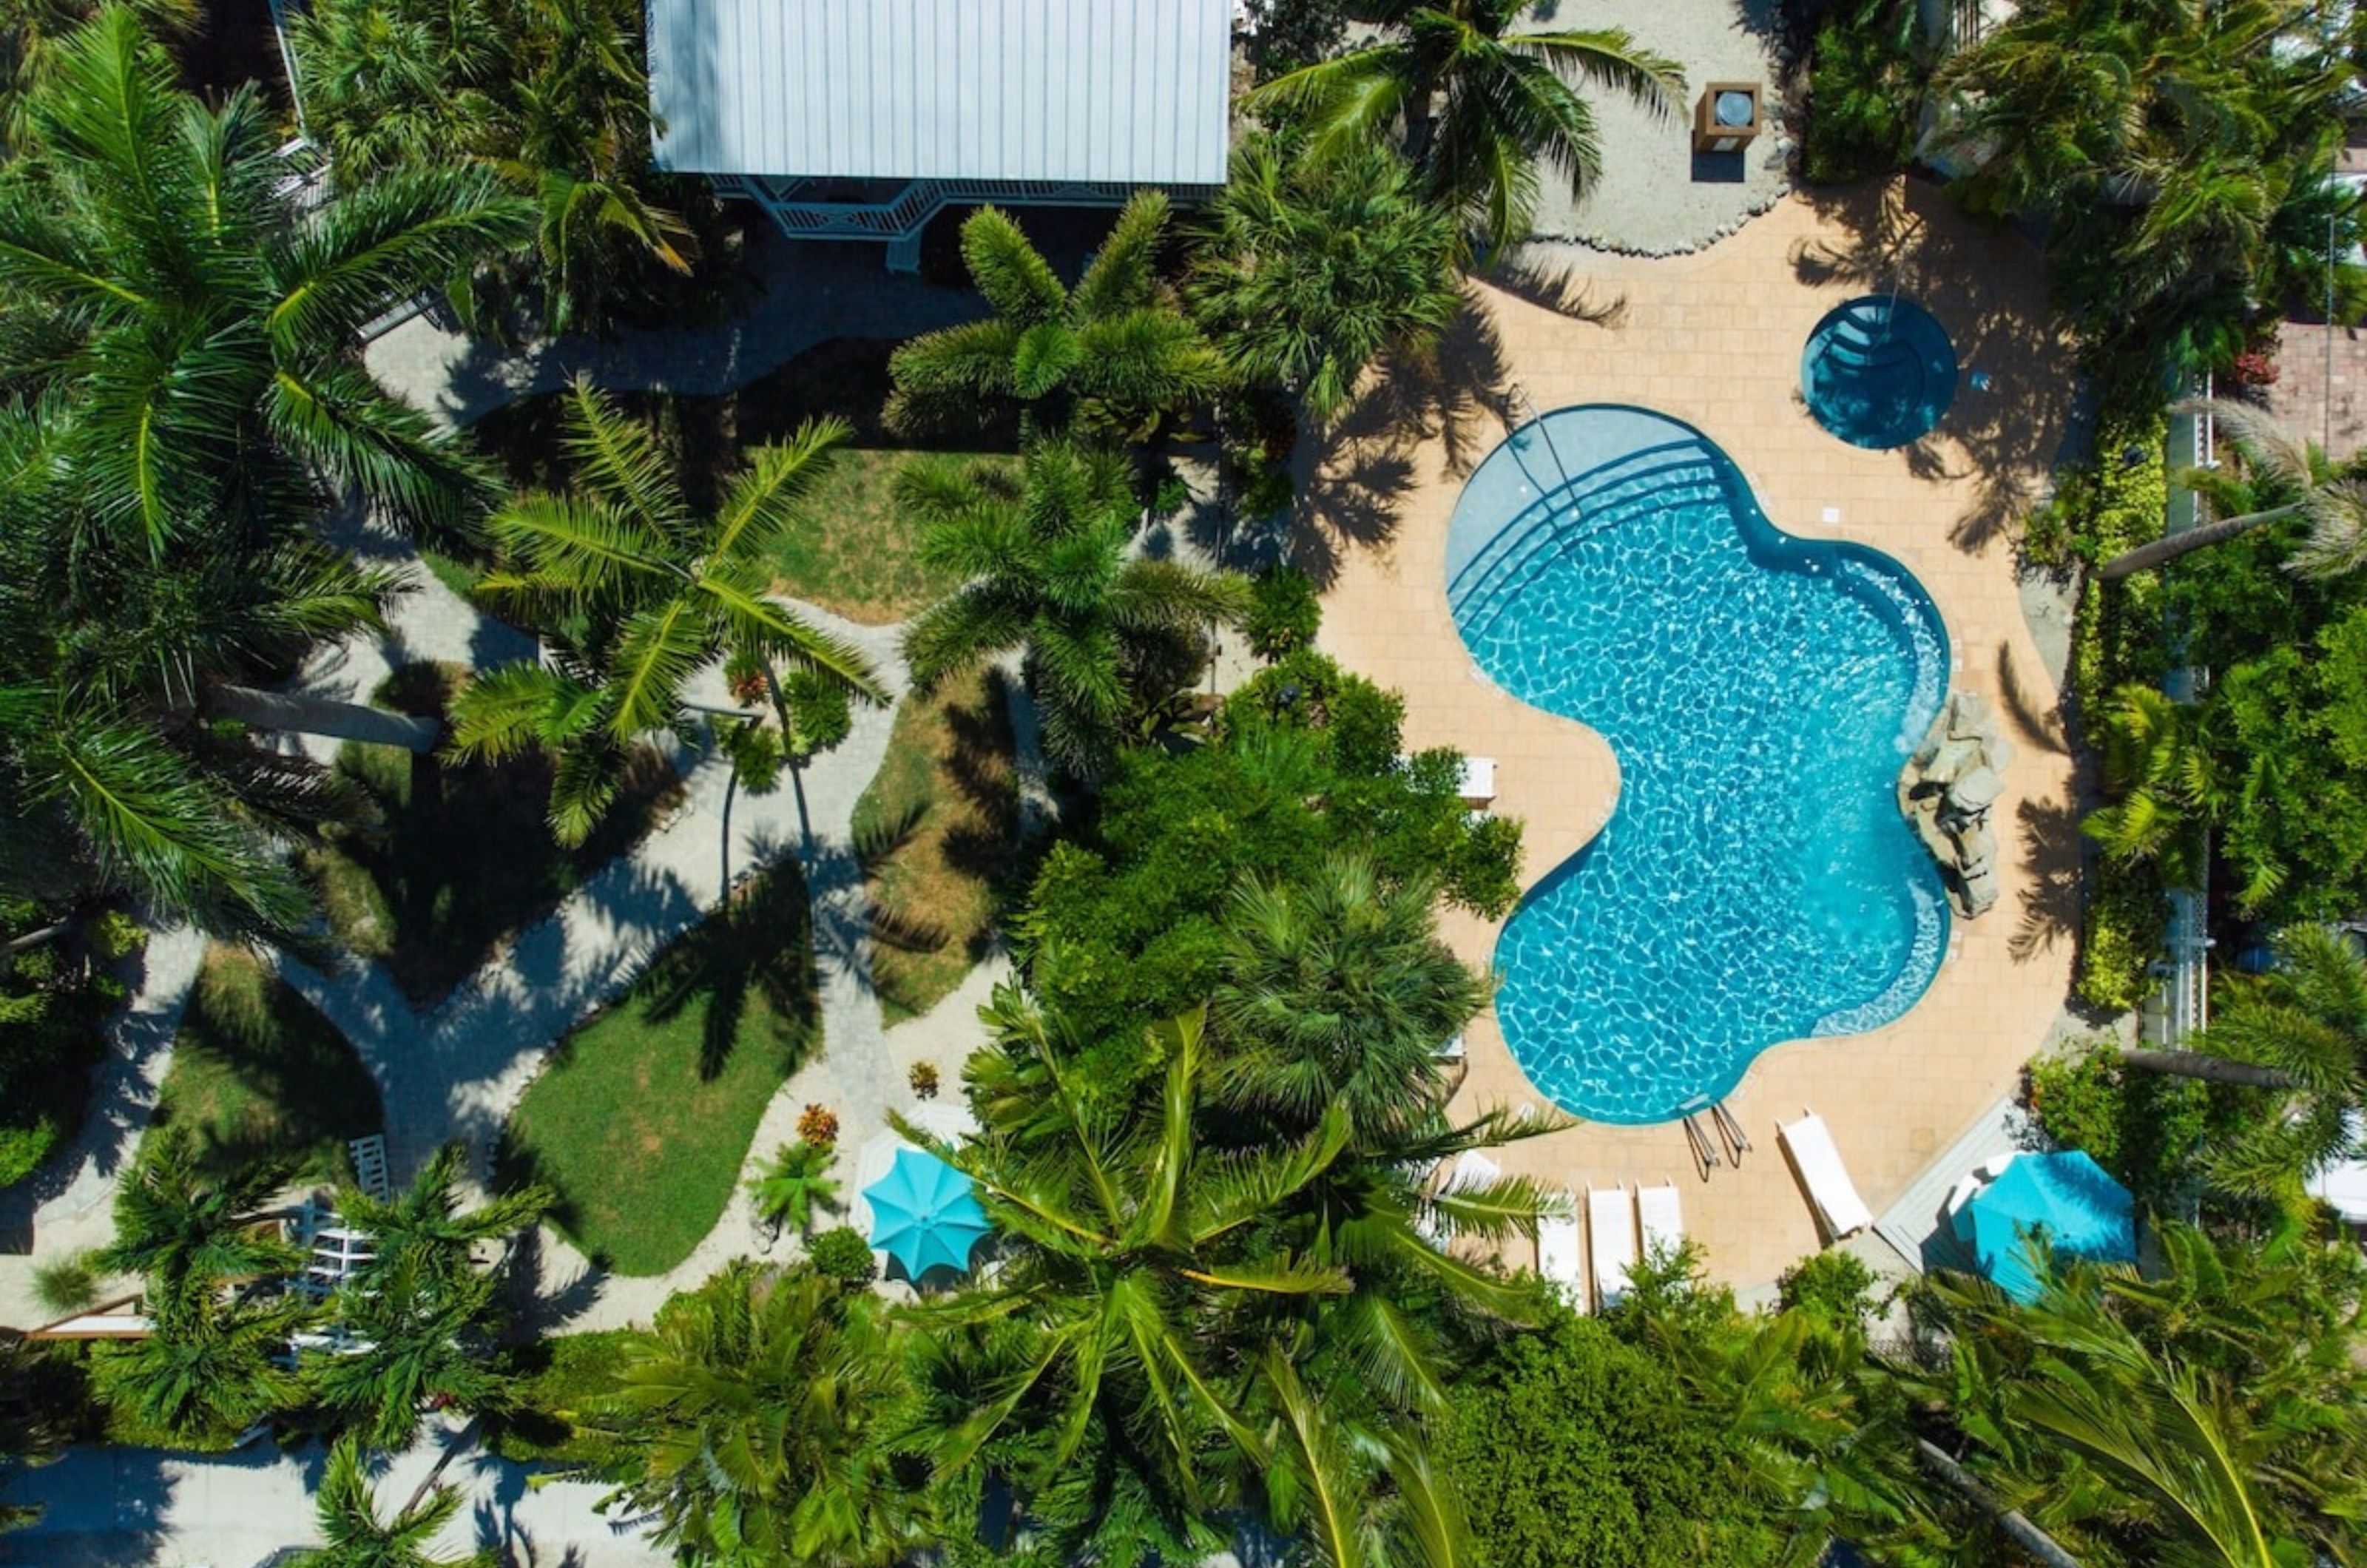 Birds eye view of the outdoor swimming pool and hot tub surrounded by greenery 